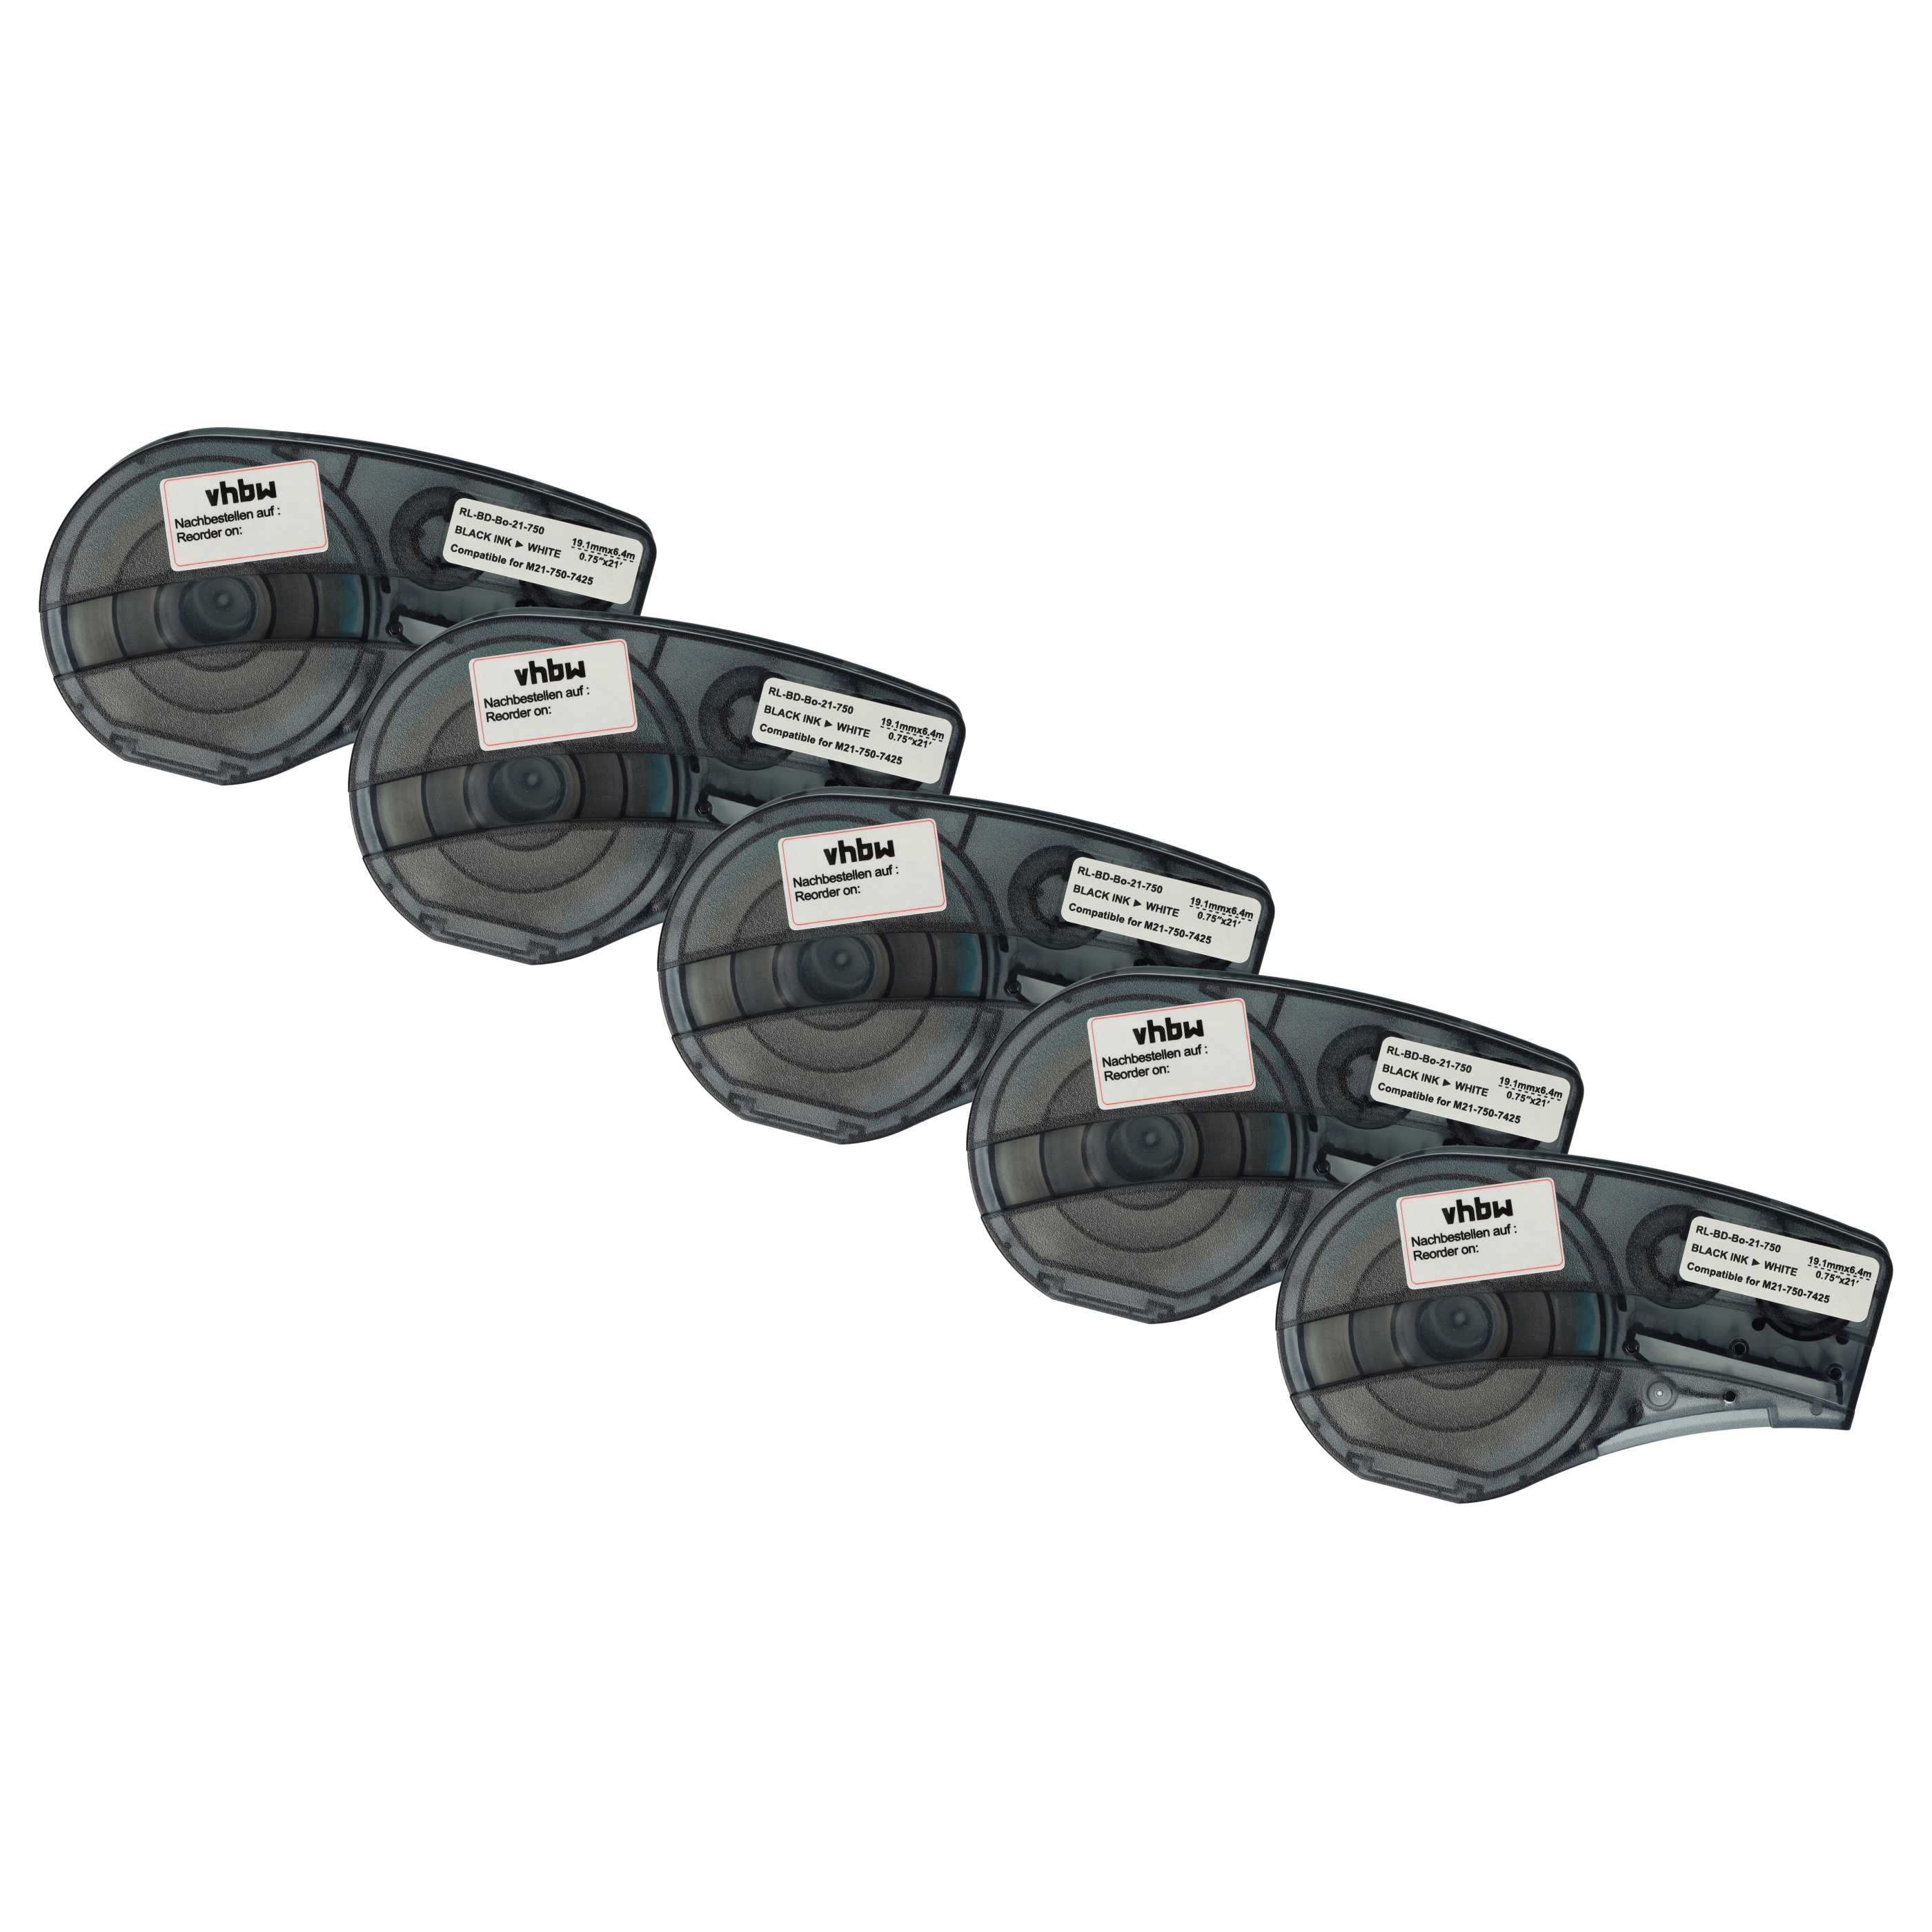 5x Label Tape as Replacement for Brady M21-750-7425 - 19.05 mm Black to White, polypropylene